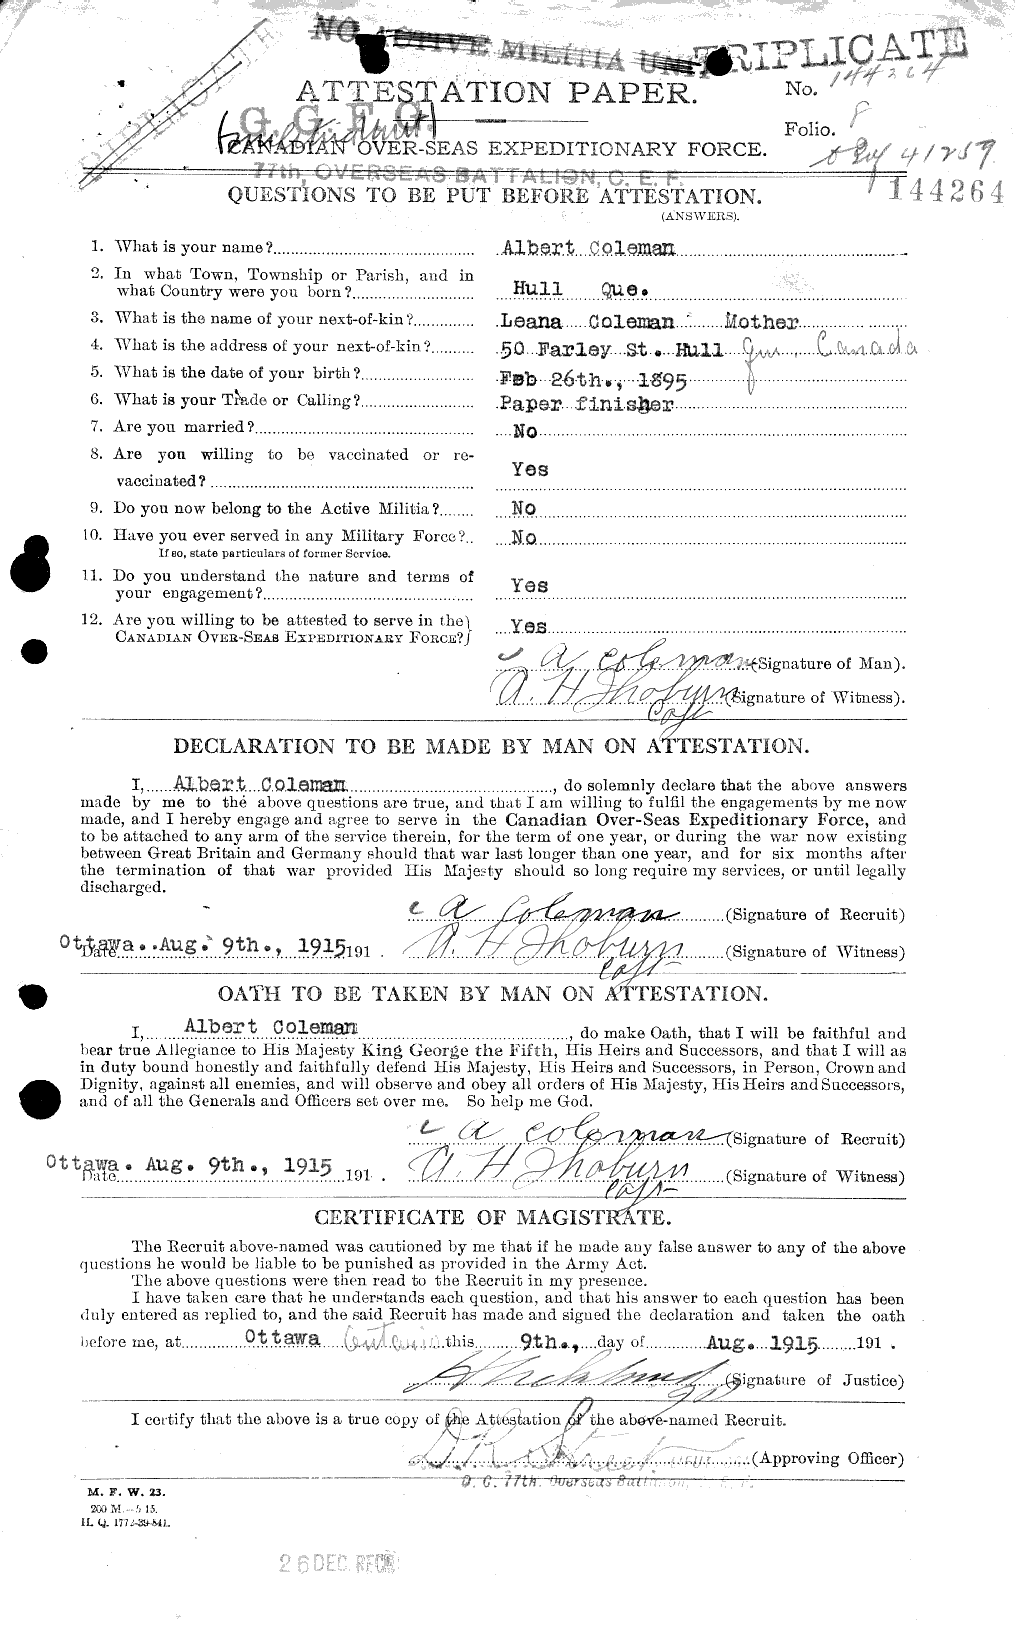 Personnel Records of the First World War - CEF 028045a